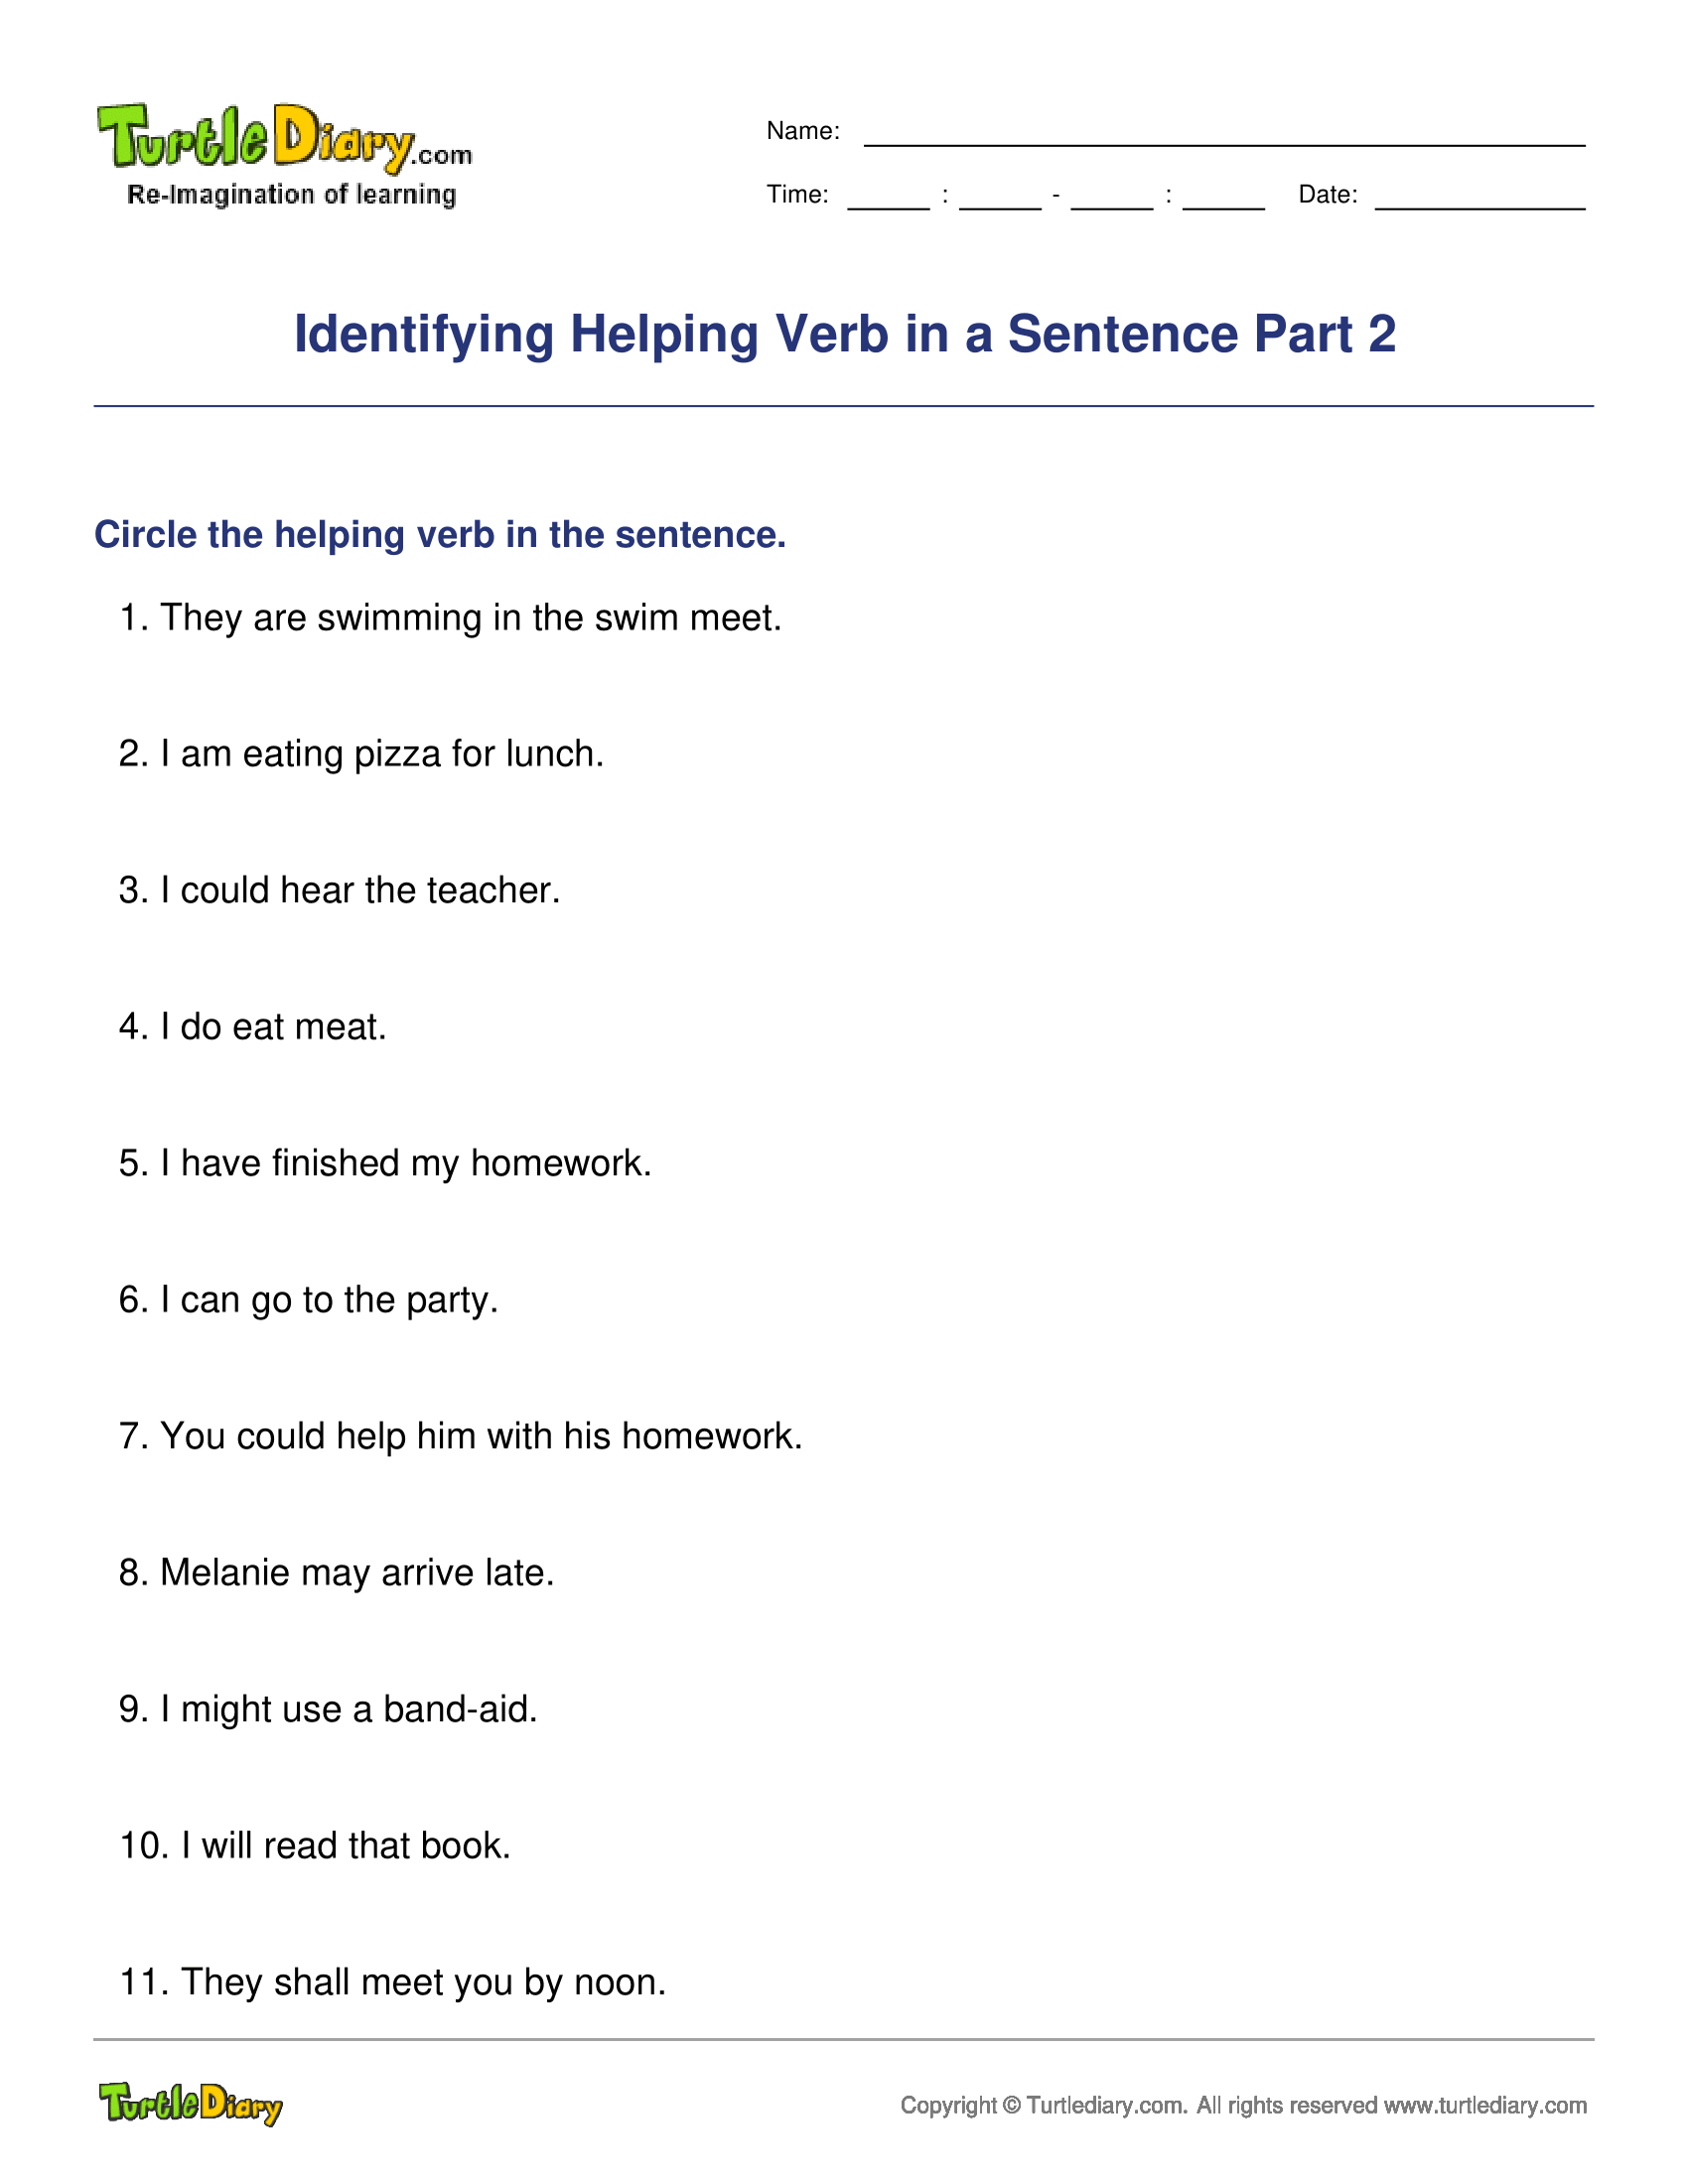 Identifying Helping Verb in a Sentence Part 2